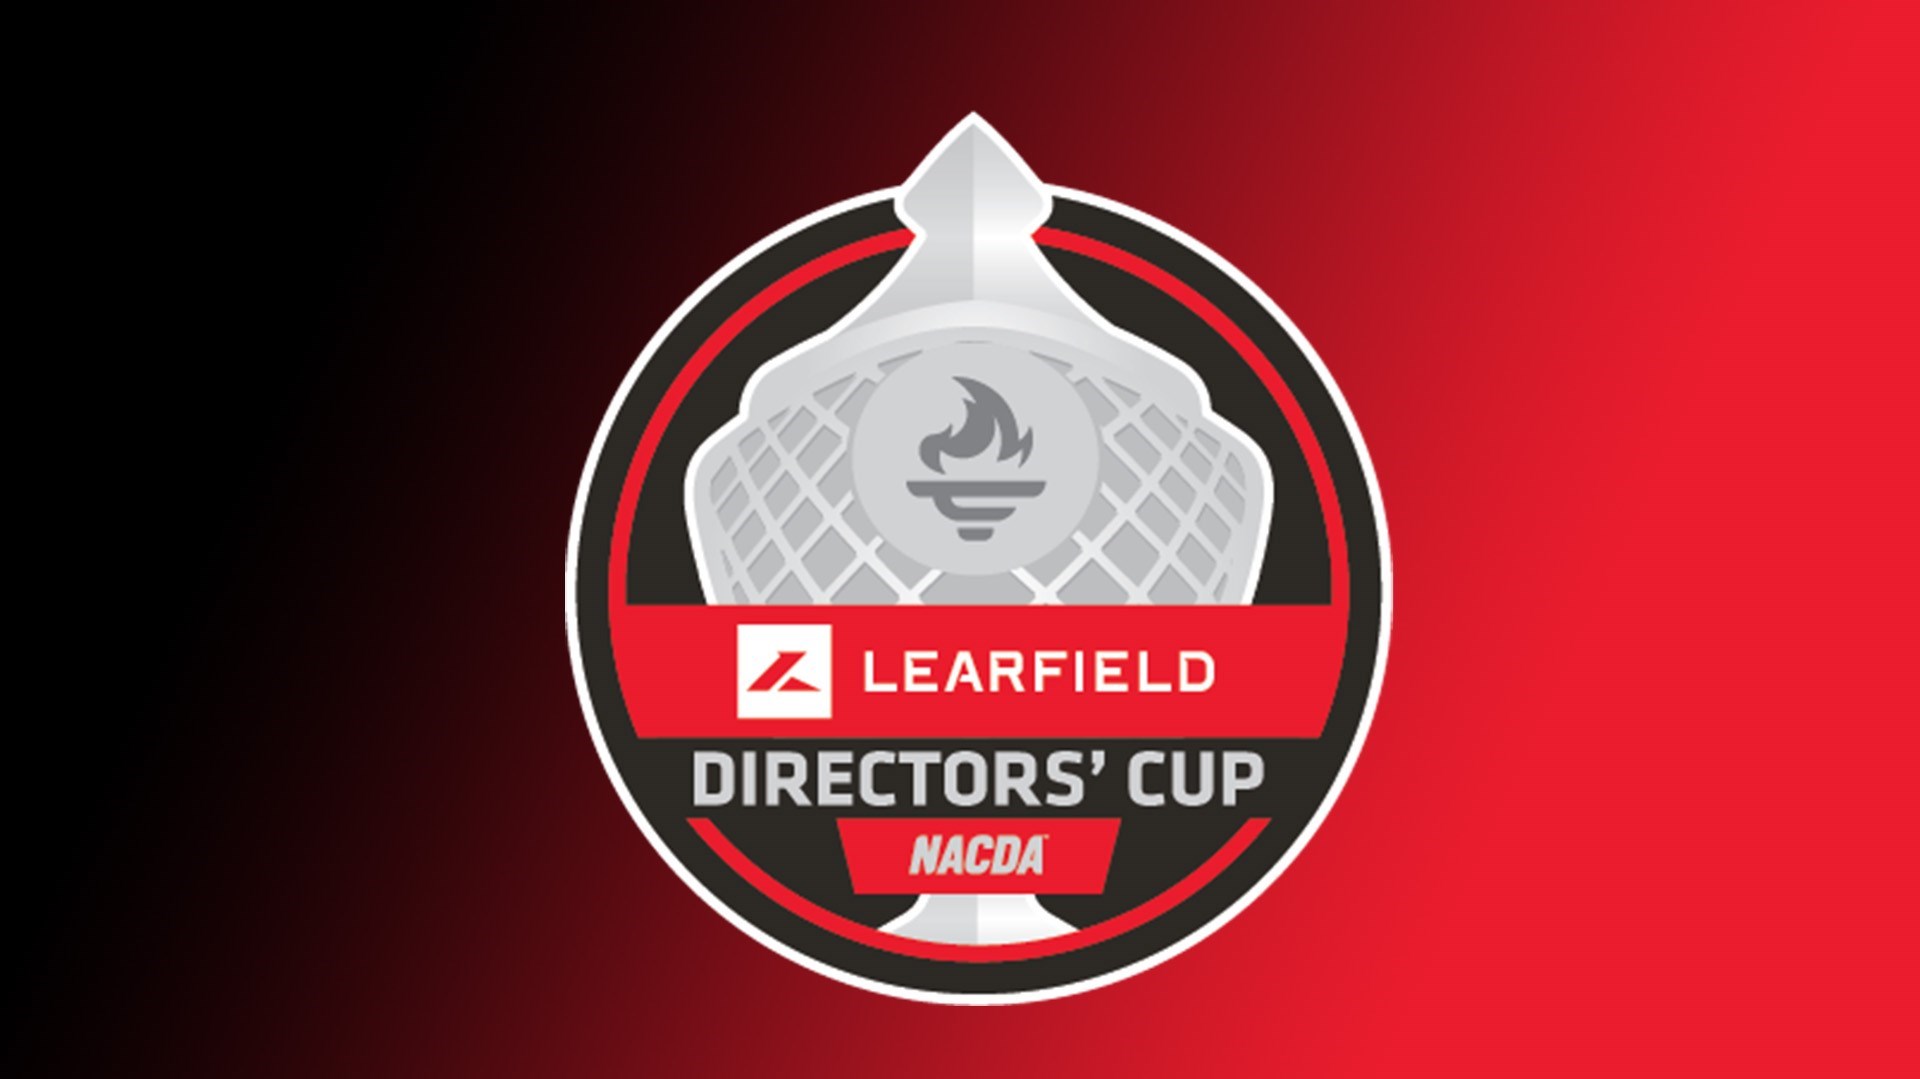 Columbia Finishes in Top50 in Final Learfield Directors' Cup Standings